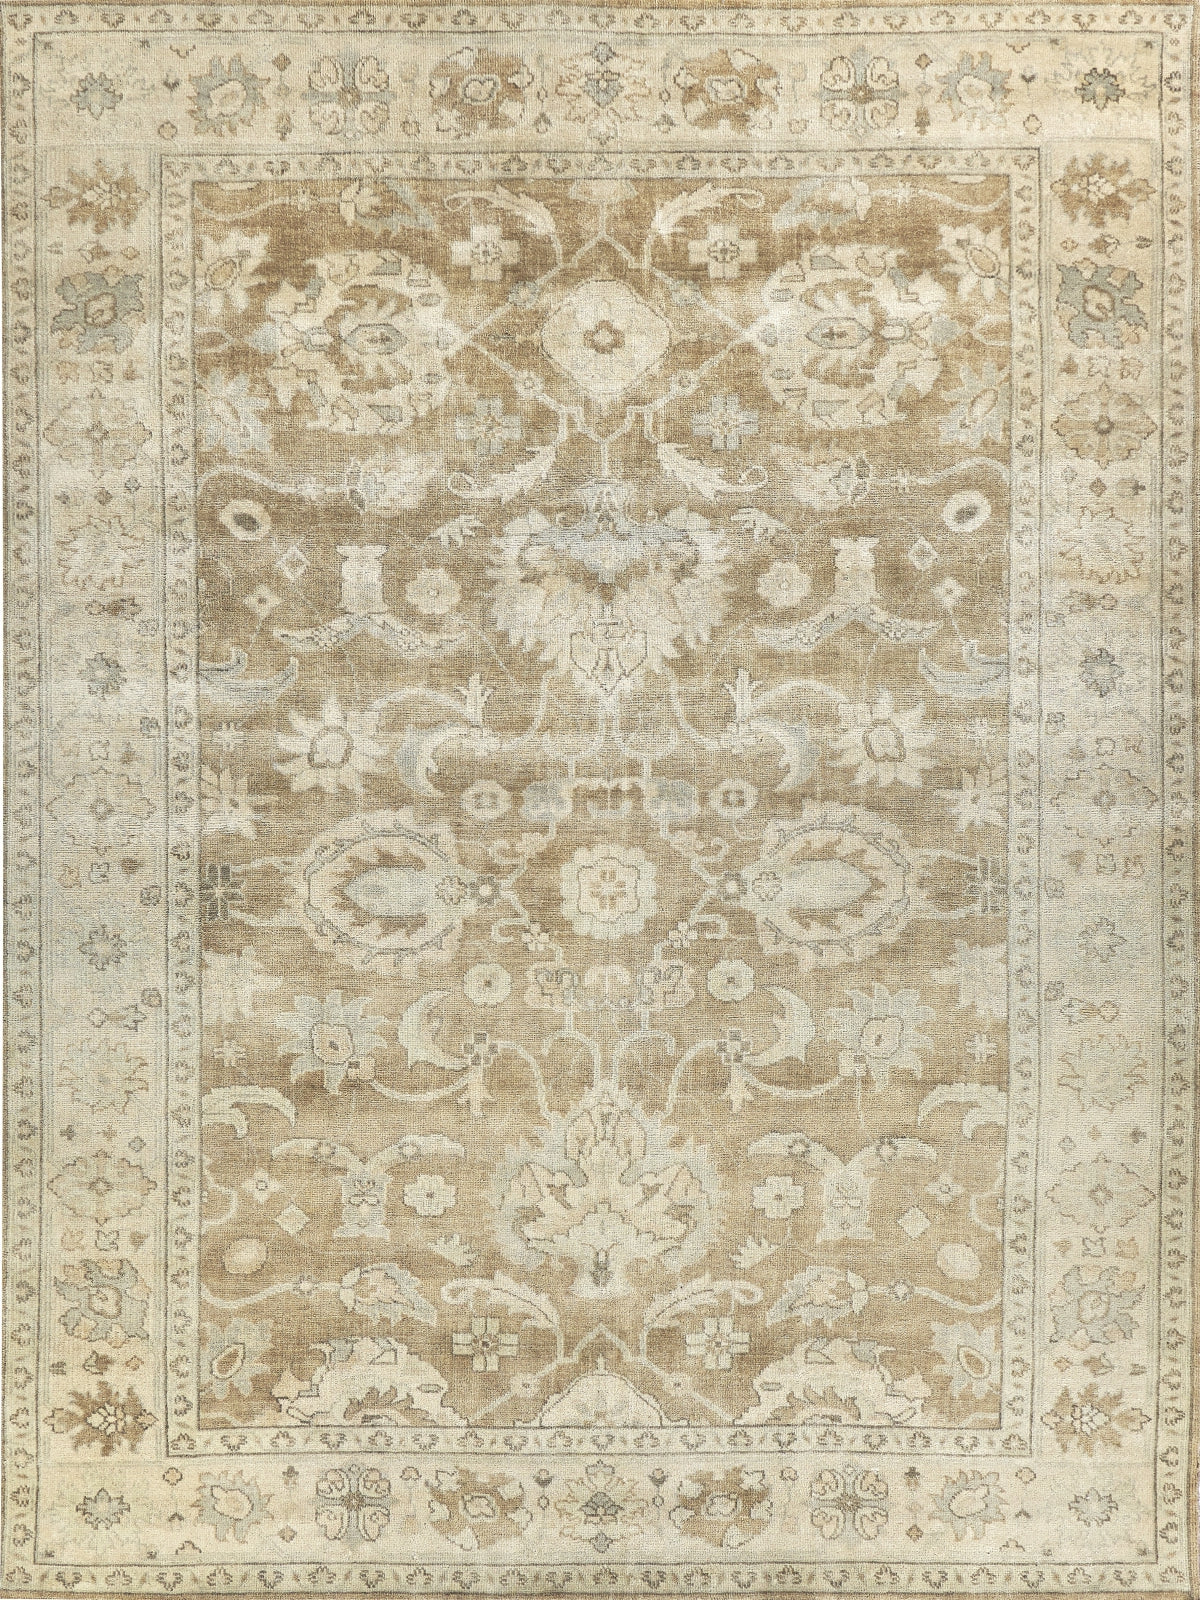 Exquisite Rugs Antique Weave Oushak 2001 Gray/Brown Area Rug